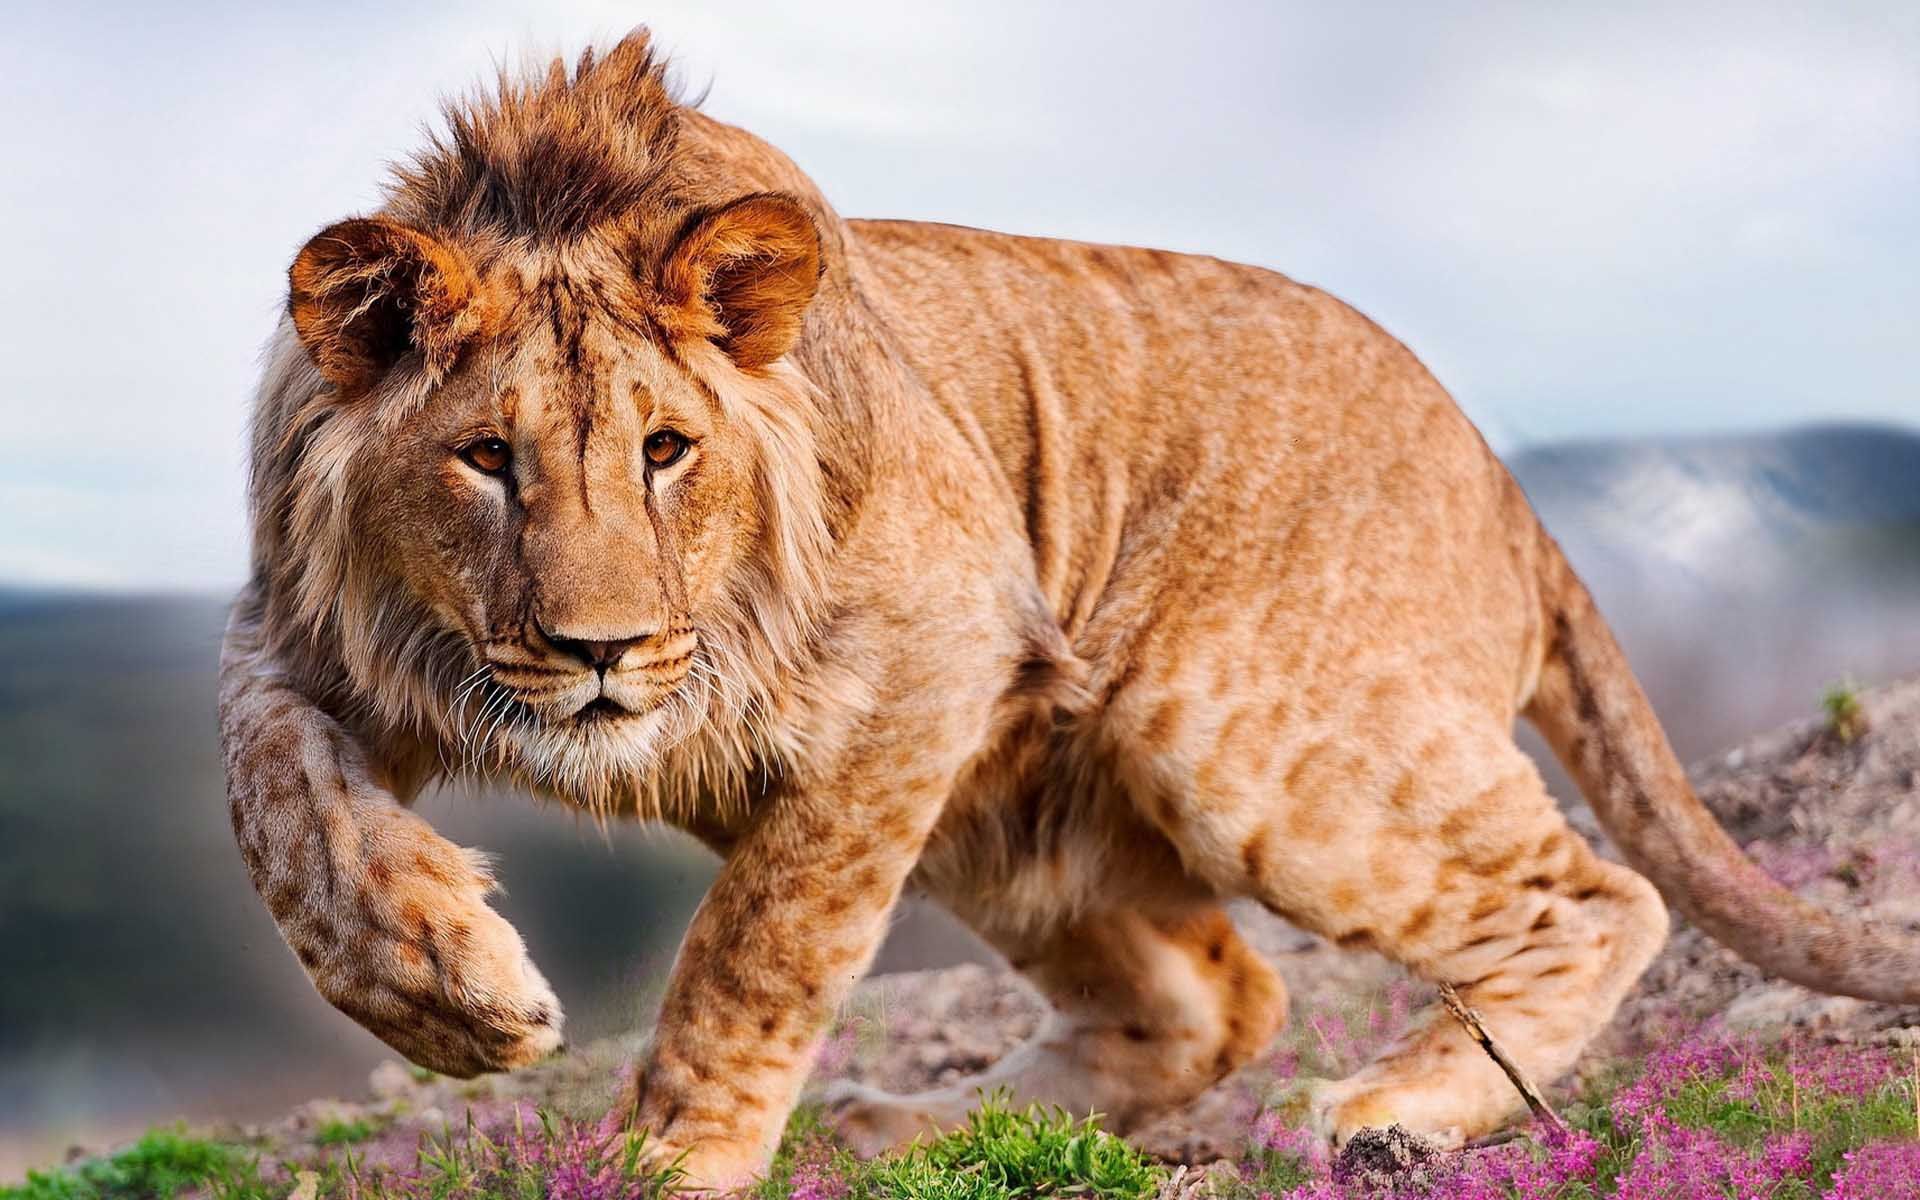 Lion In Action Wallpaper - Action Hd Wallpaper For Mobile - HD Wallpaper 